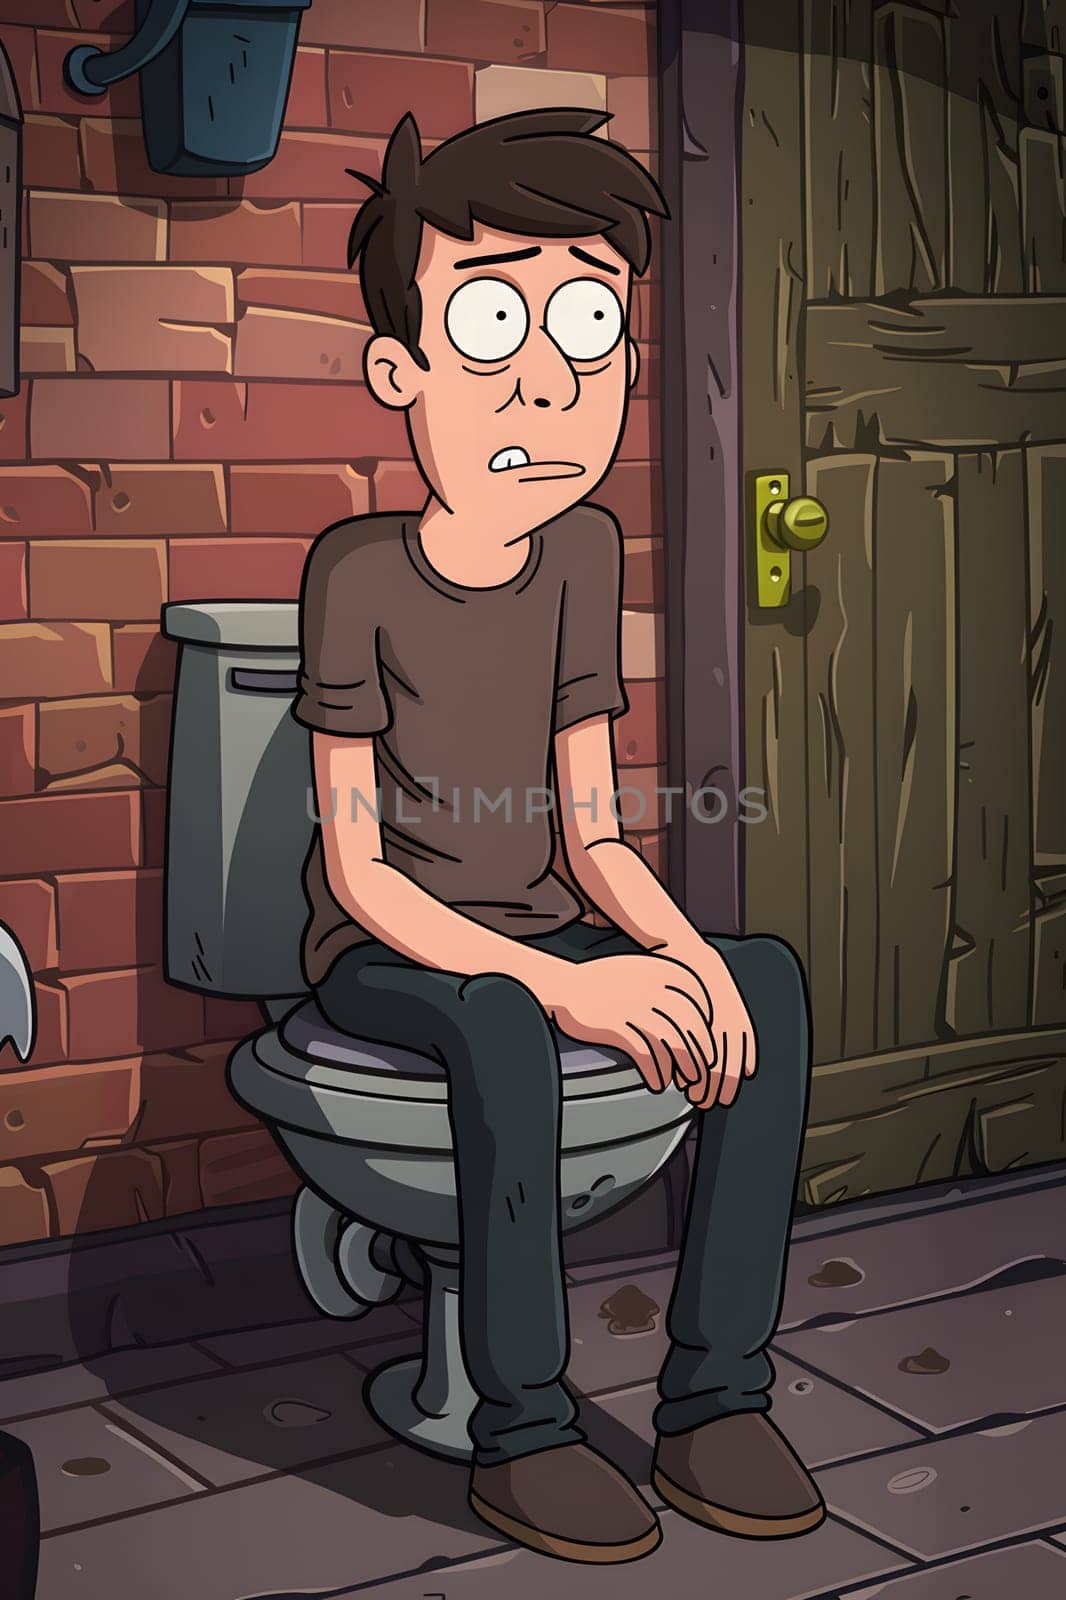 An animated cartoon man with glasses is sitting on a wooden chair in front of a brick wall, in a drawing illustration style. The art is a painting